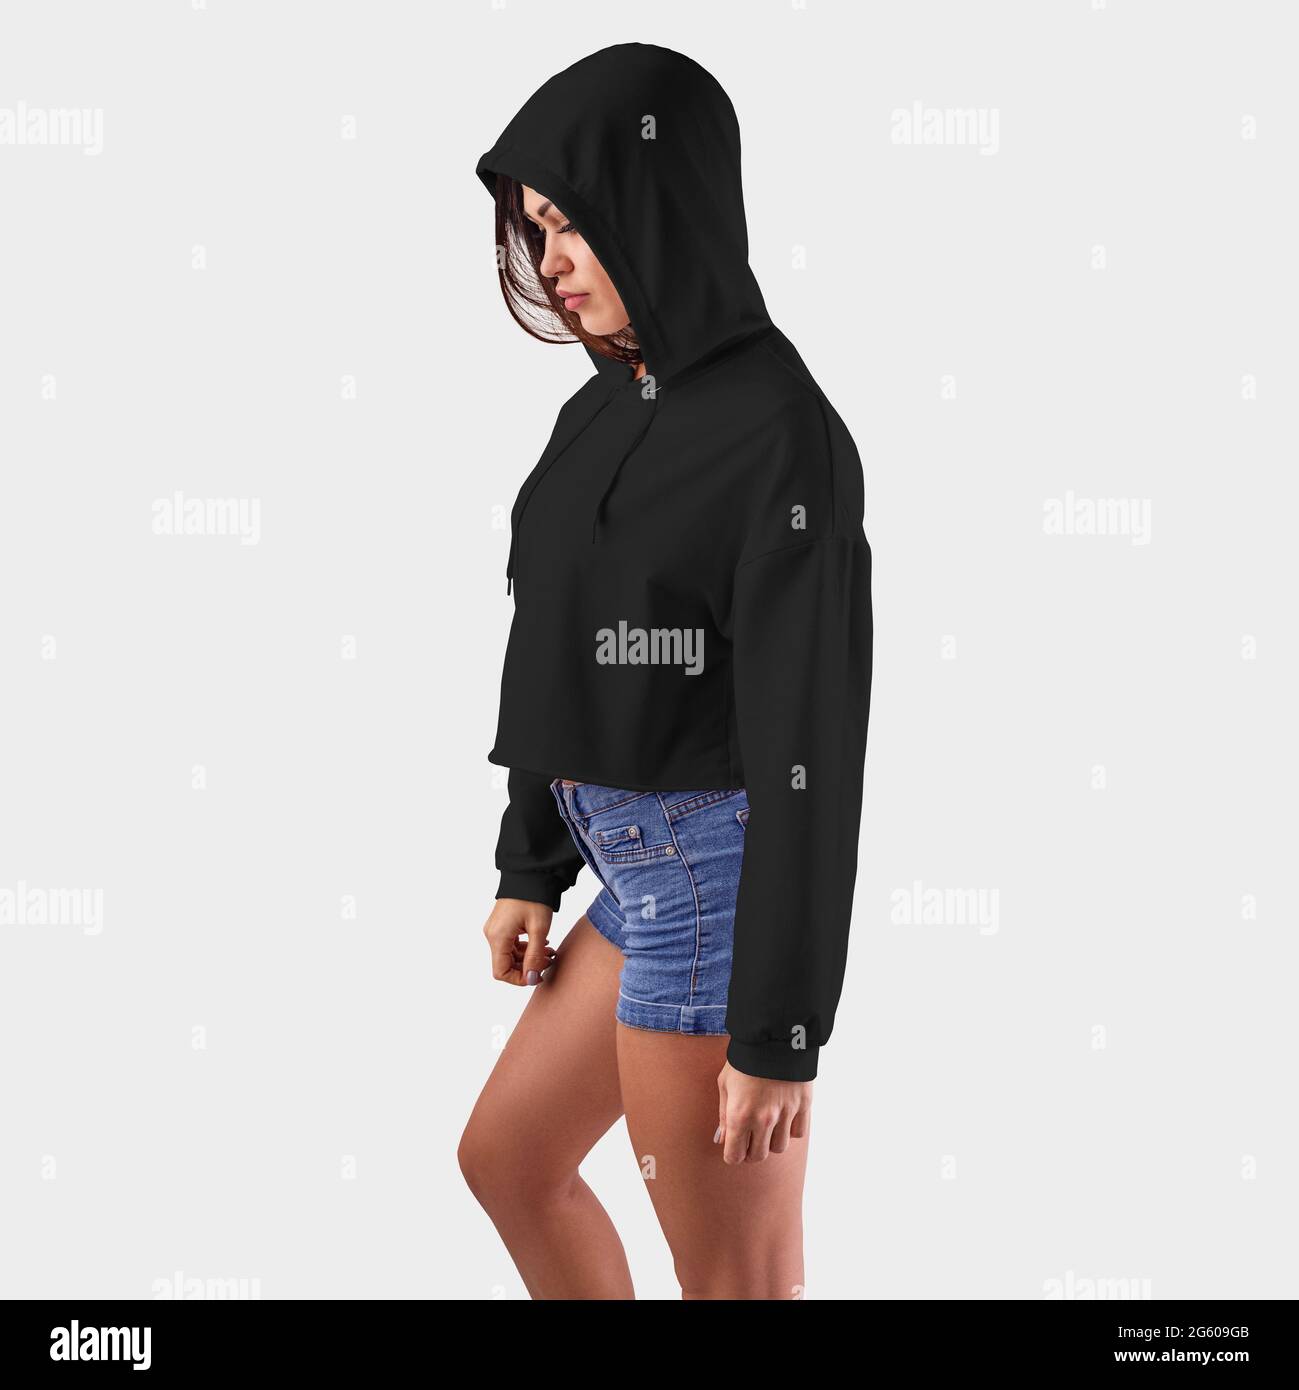 Template black hoodie for a girl in a hood with her head bowed, for presentation of design. Mockup of empty sweatshirt isolated on a white background. Stock Photo